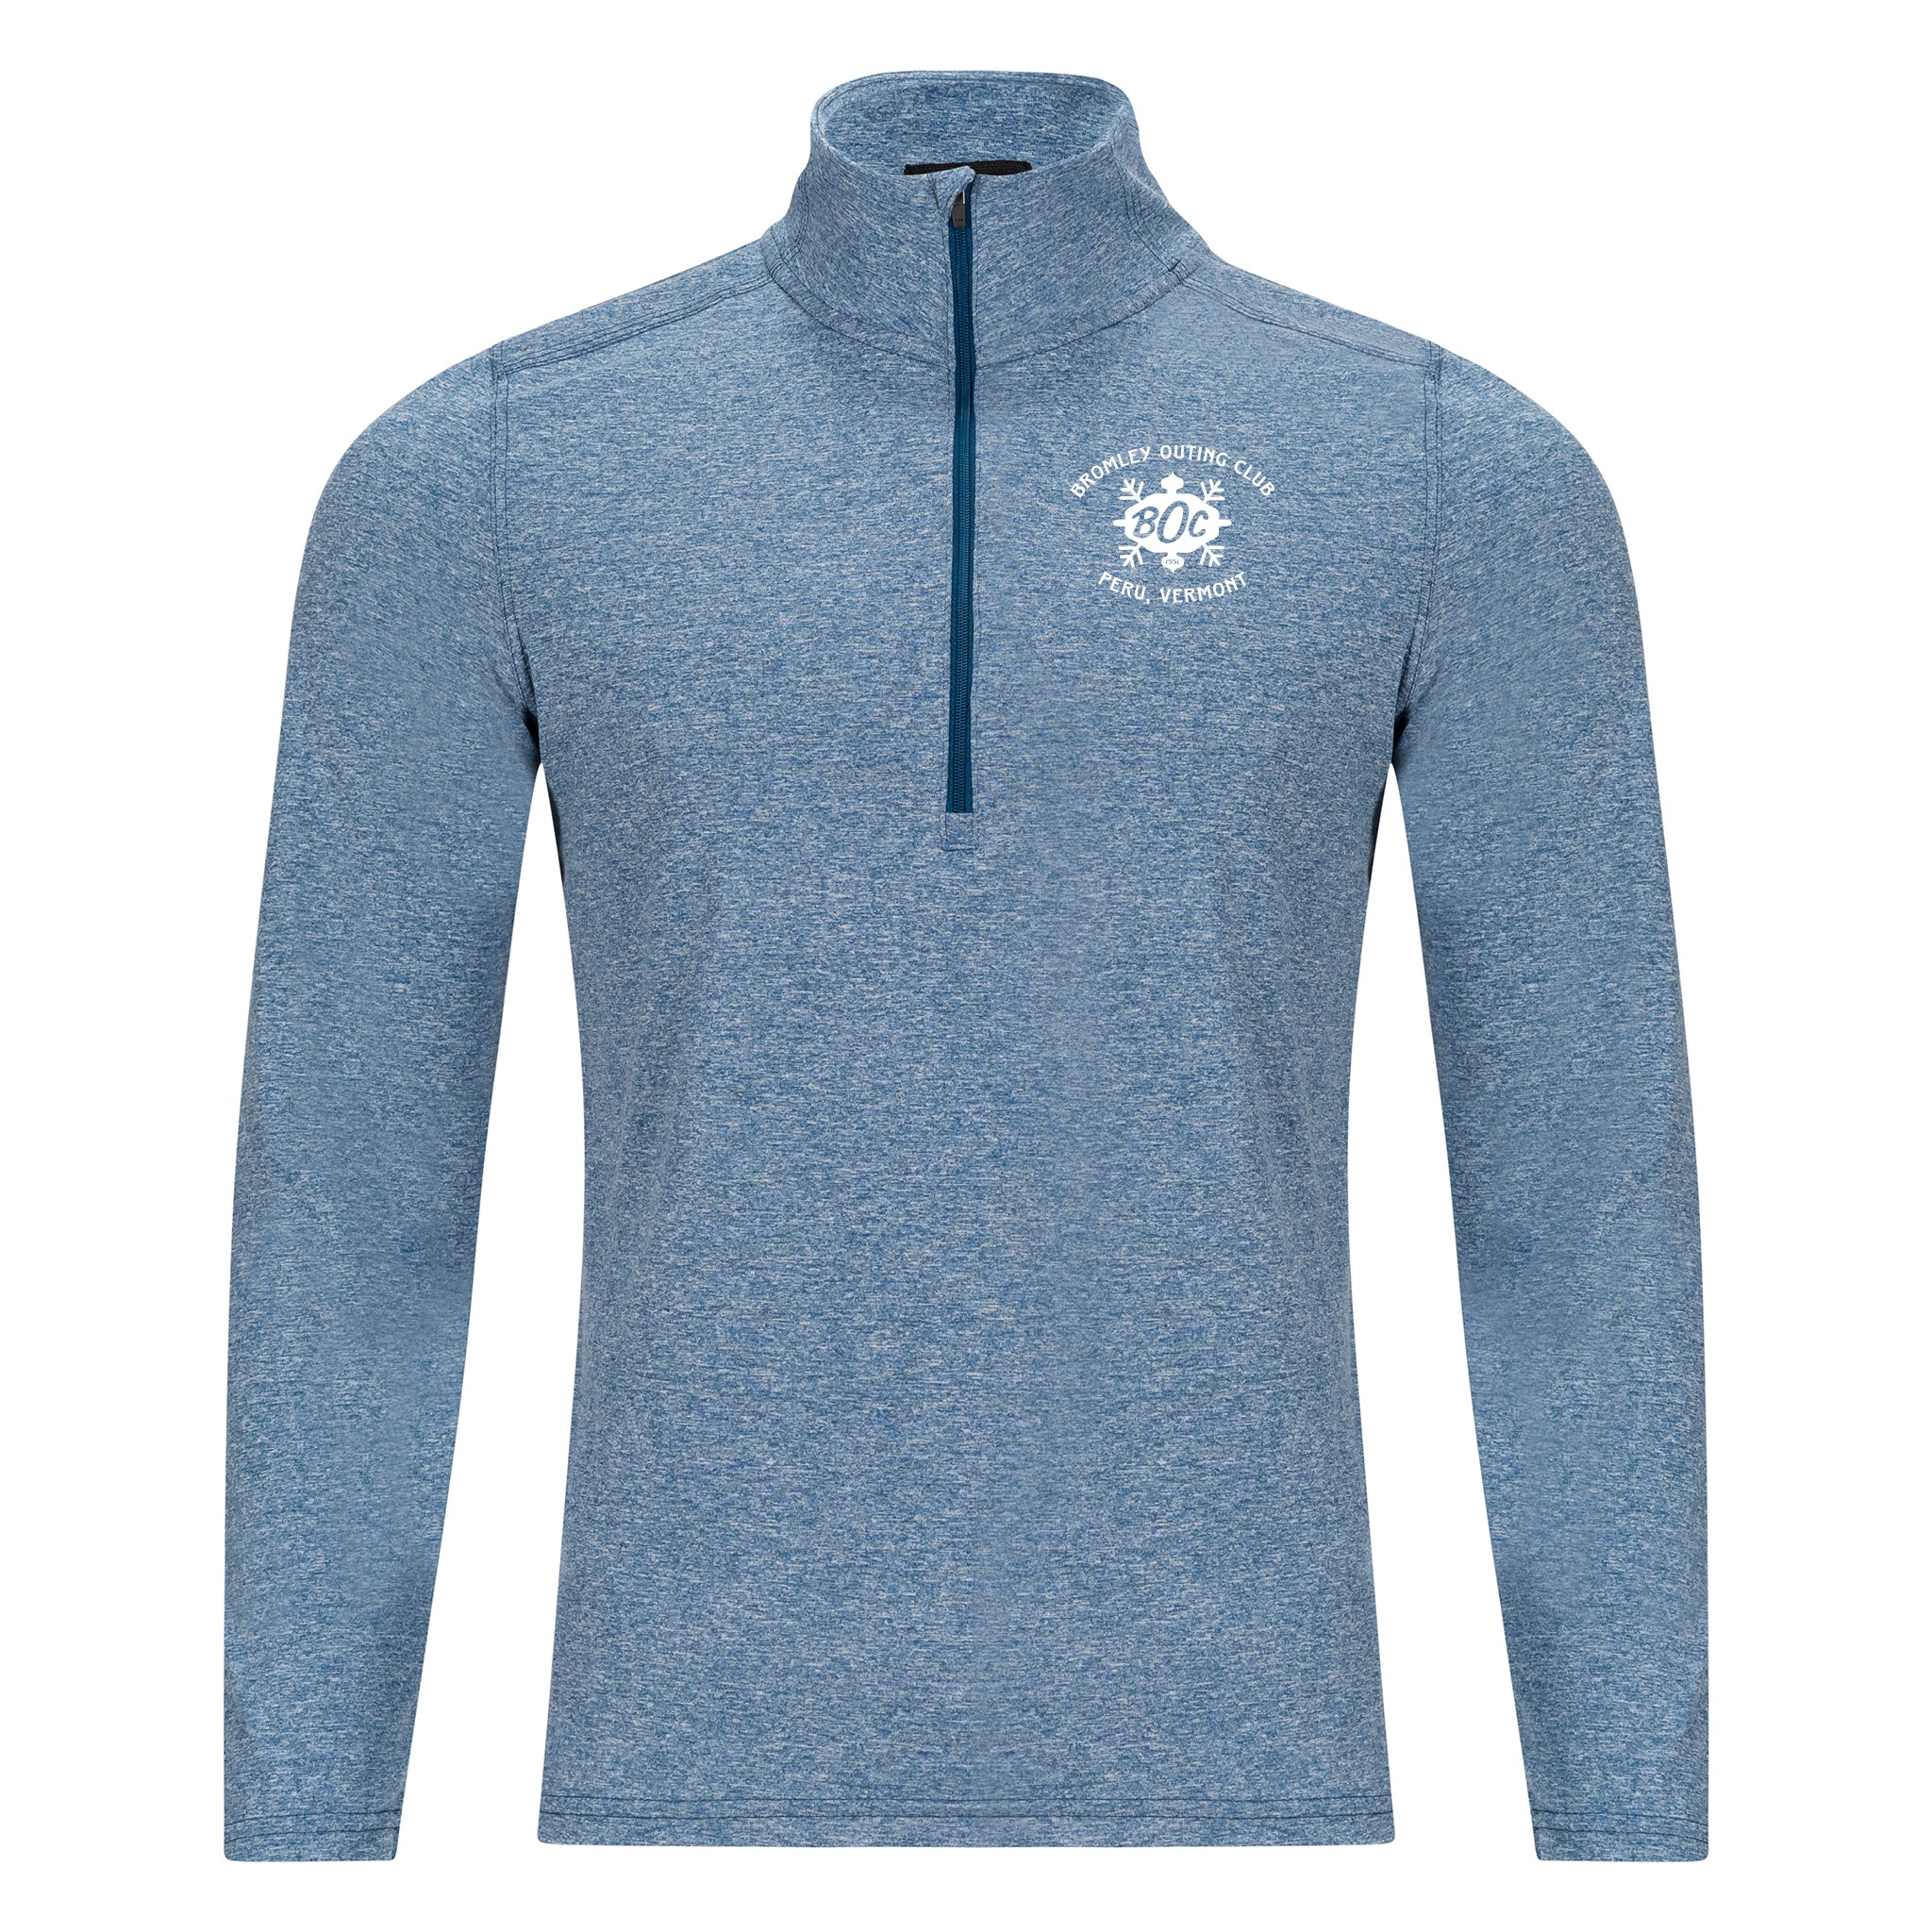 Men's Deluge Quarter Zip - Bromley Outing Club